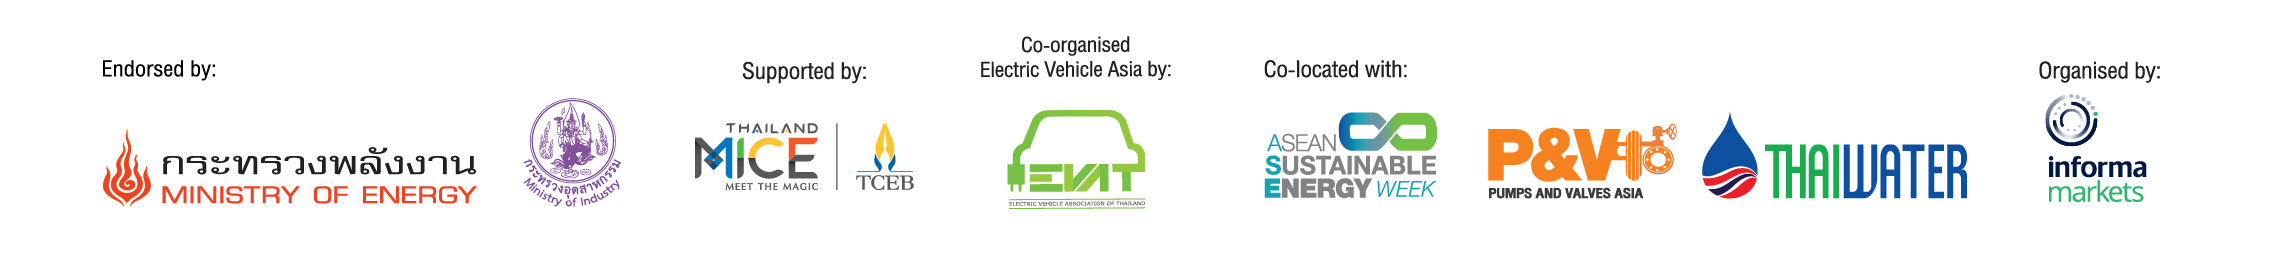 Electric Vehicle Asia 2023 E-Newsletter Footer